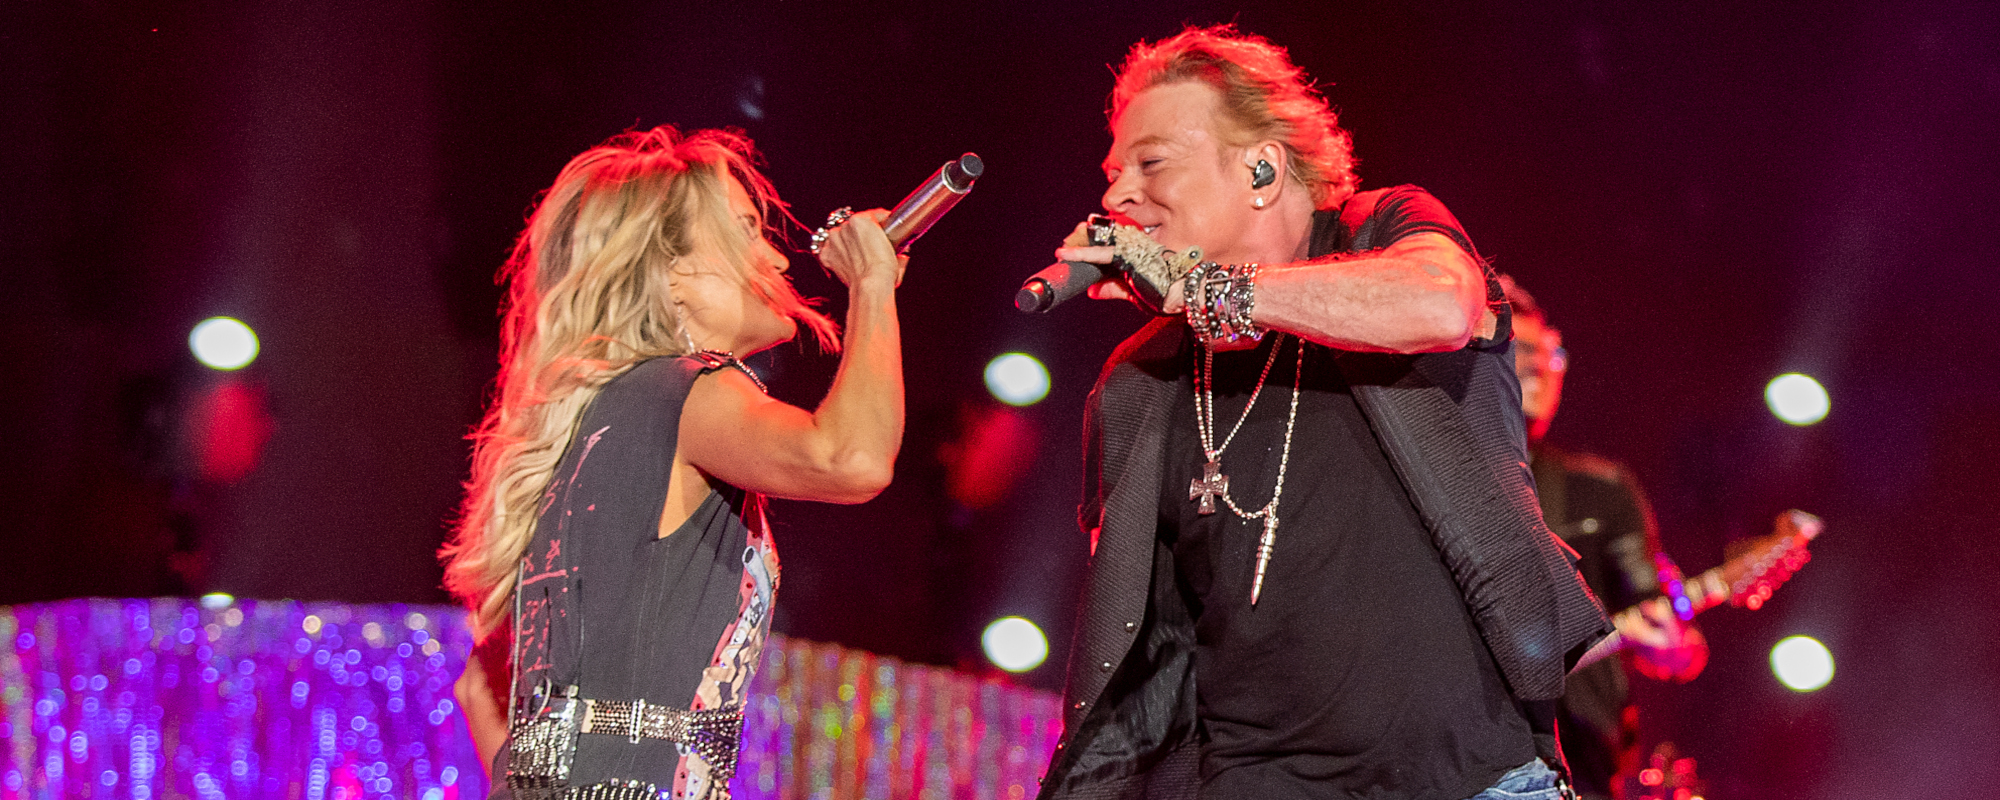 Axl Rose Sings Some Guns N’ Roses Hits with Carrie Underwood at Stagecoach